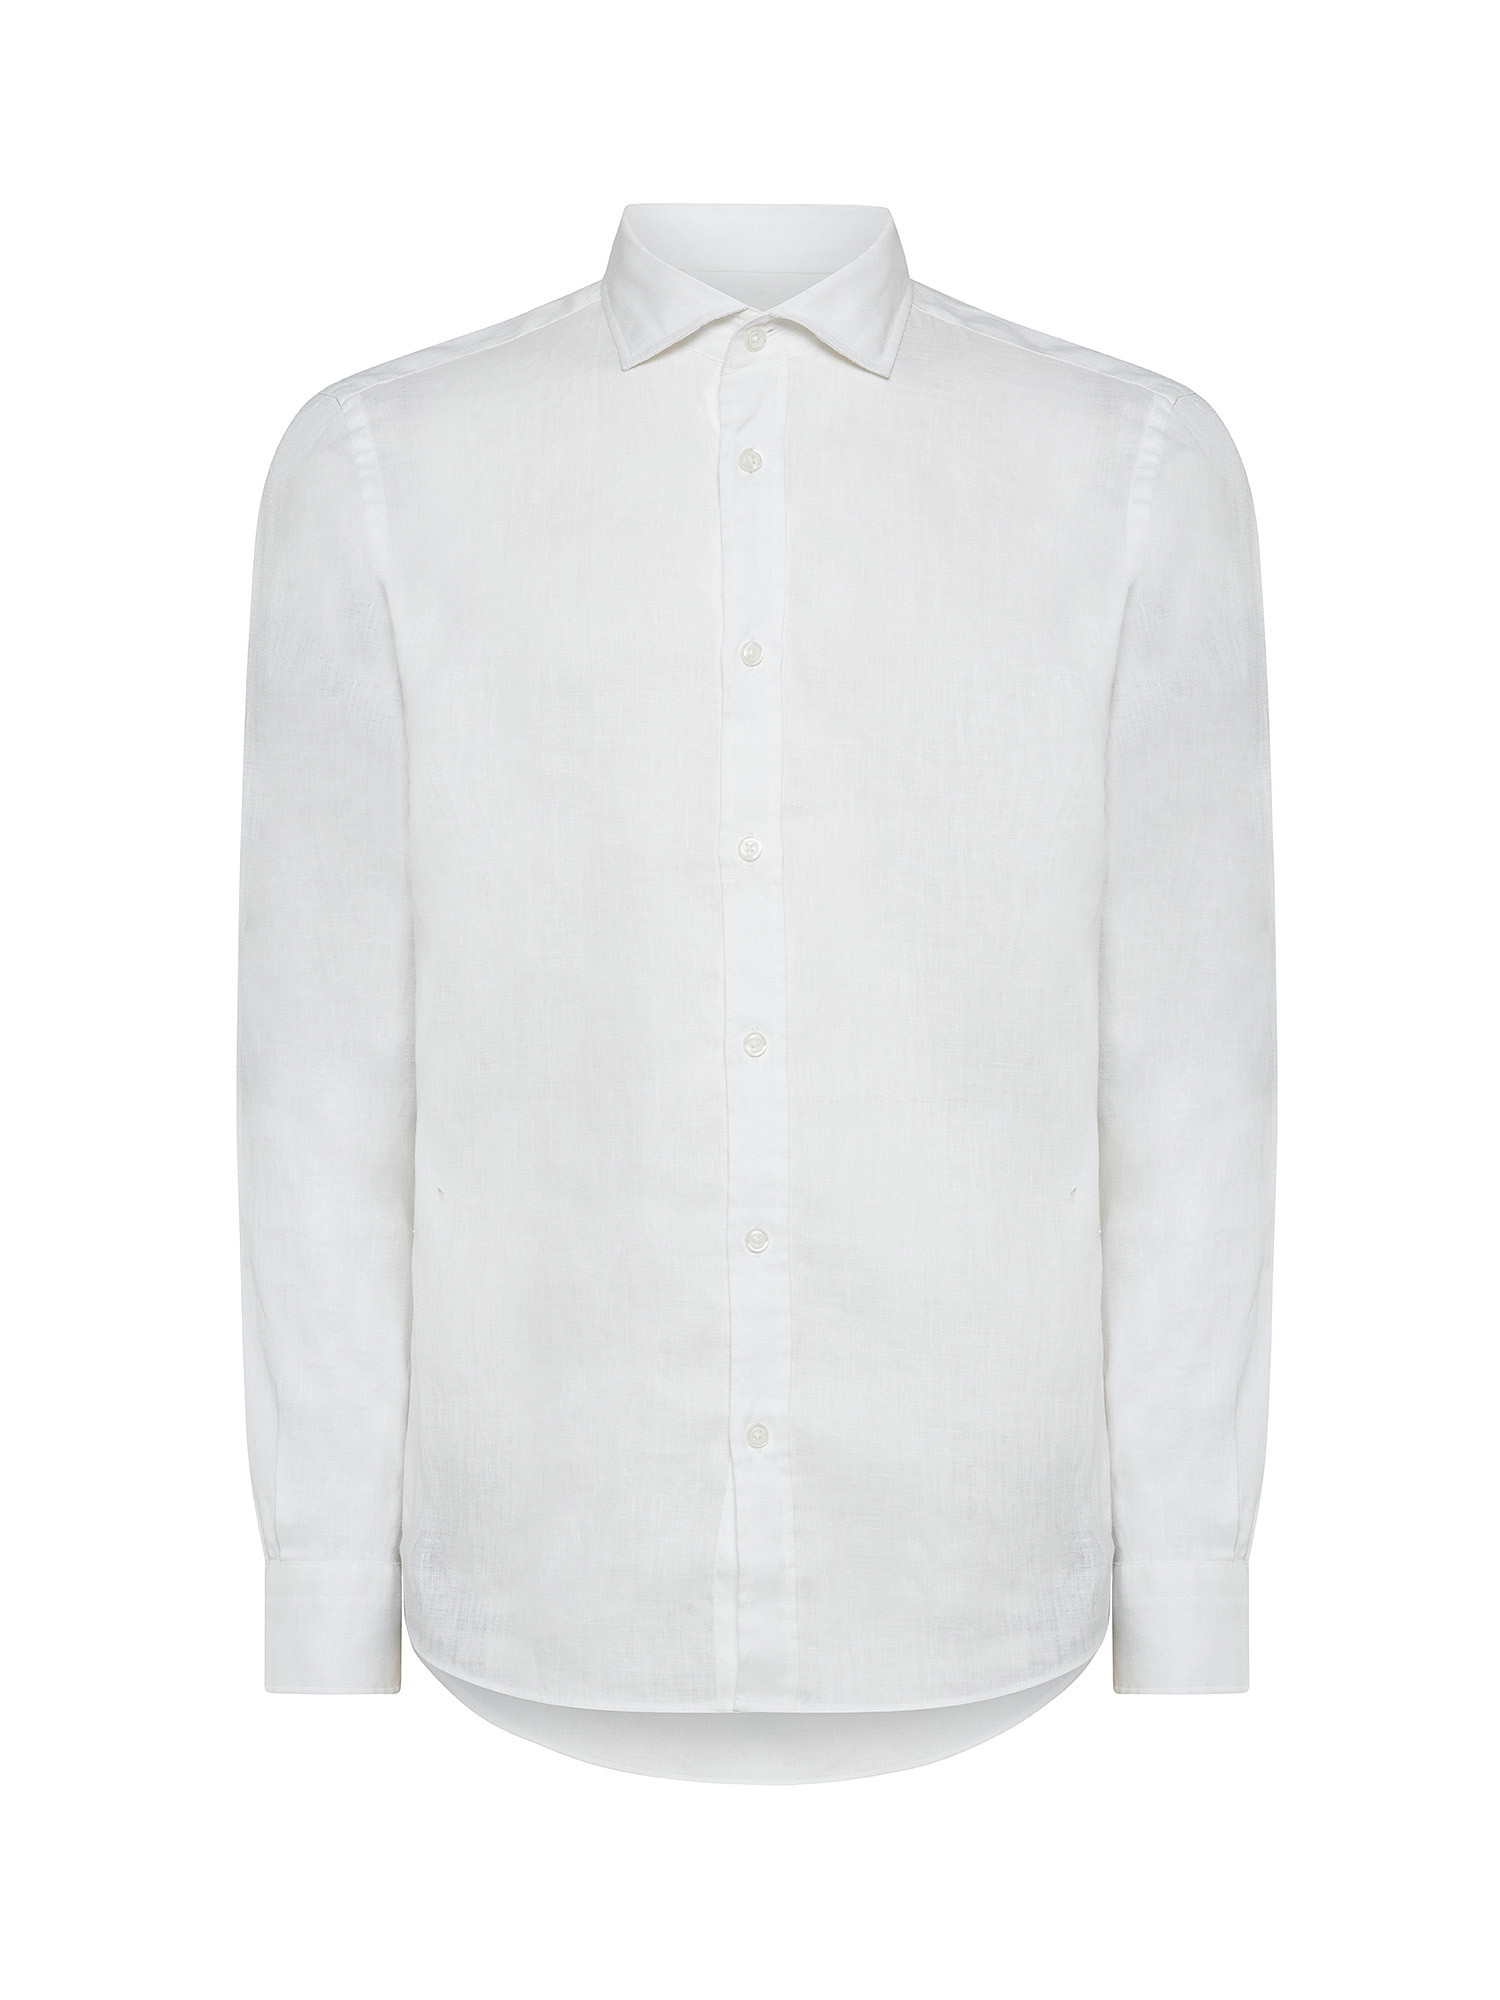 Luca D'Altieri - Tailor fit shirt in pure linen, White, large image number 0